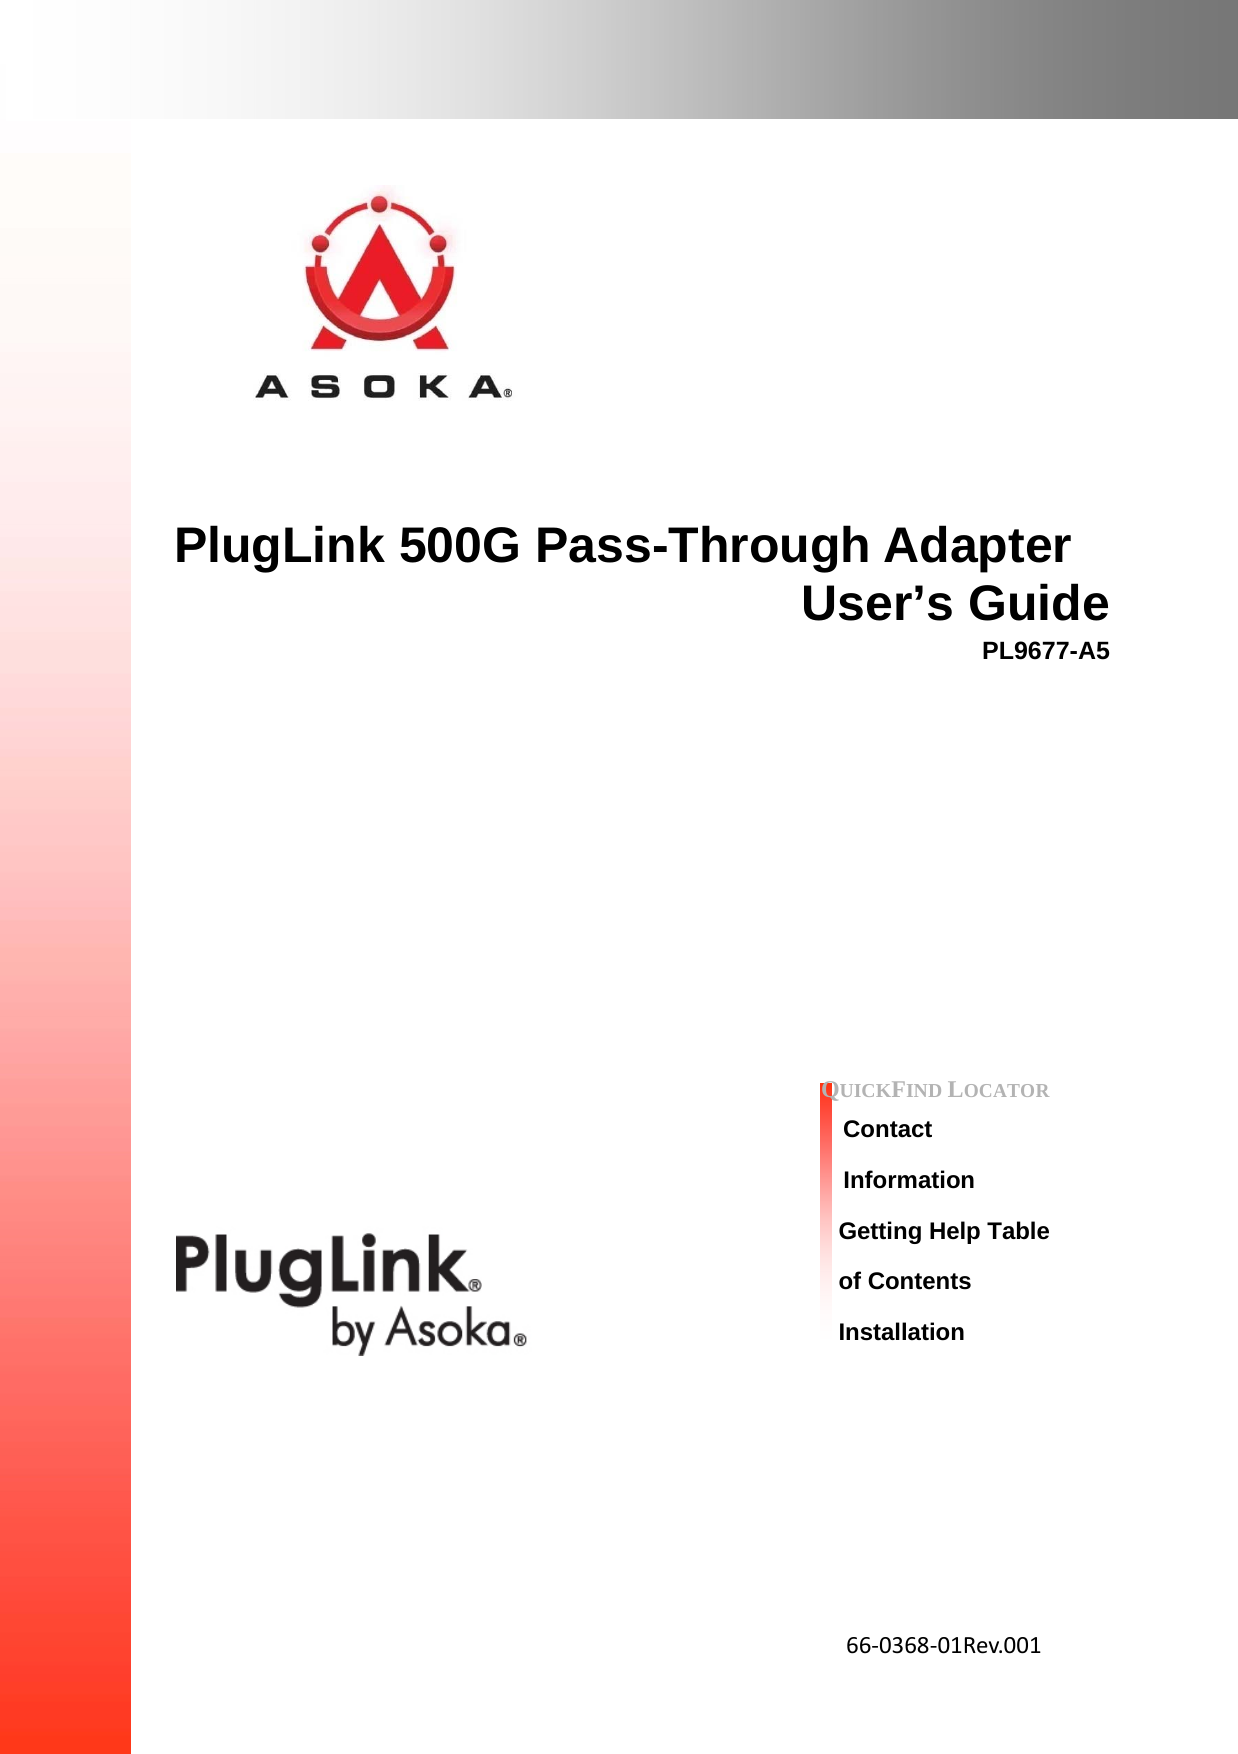         PlugLink 500G Pass-Through Adapter User’s Guide PL9677-A5                     QUICKFIND LOCATOR    Contact  Information Getting Help Table of Contents Installation            66‐0368‐01Rev.001